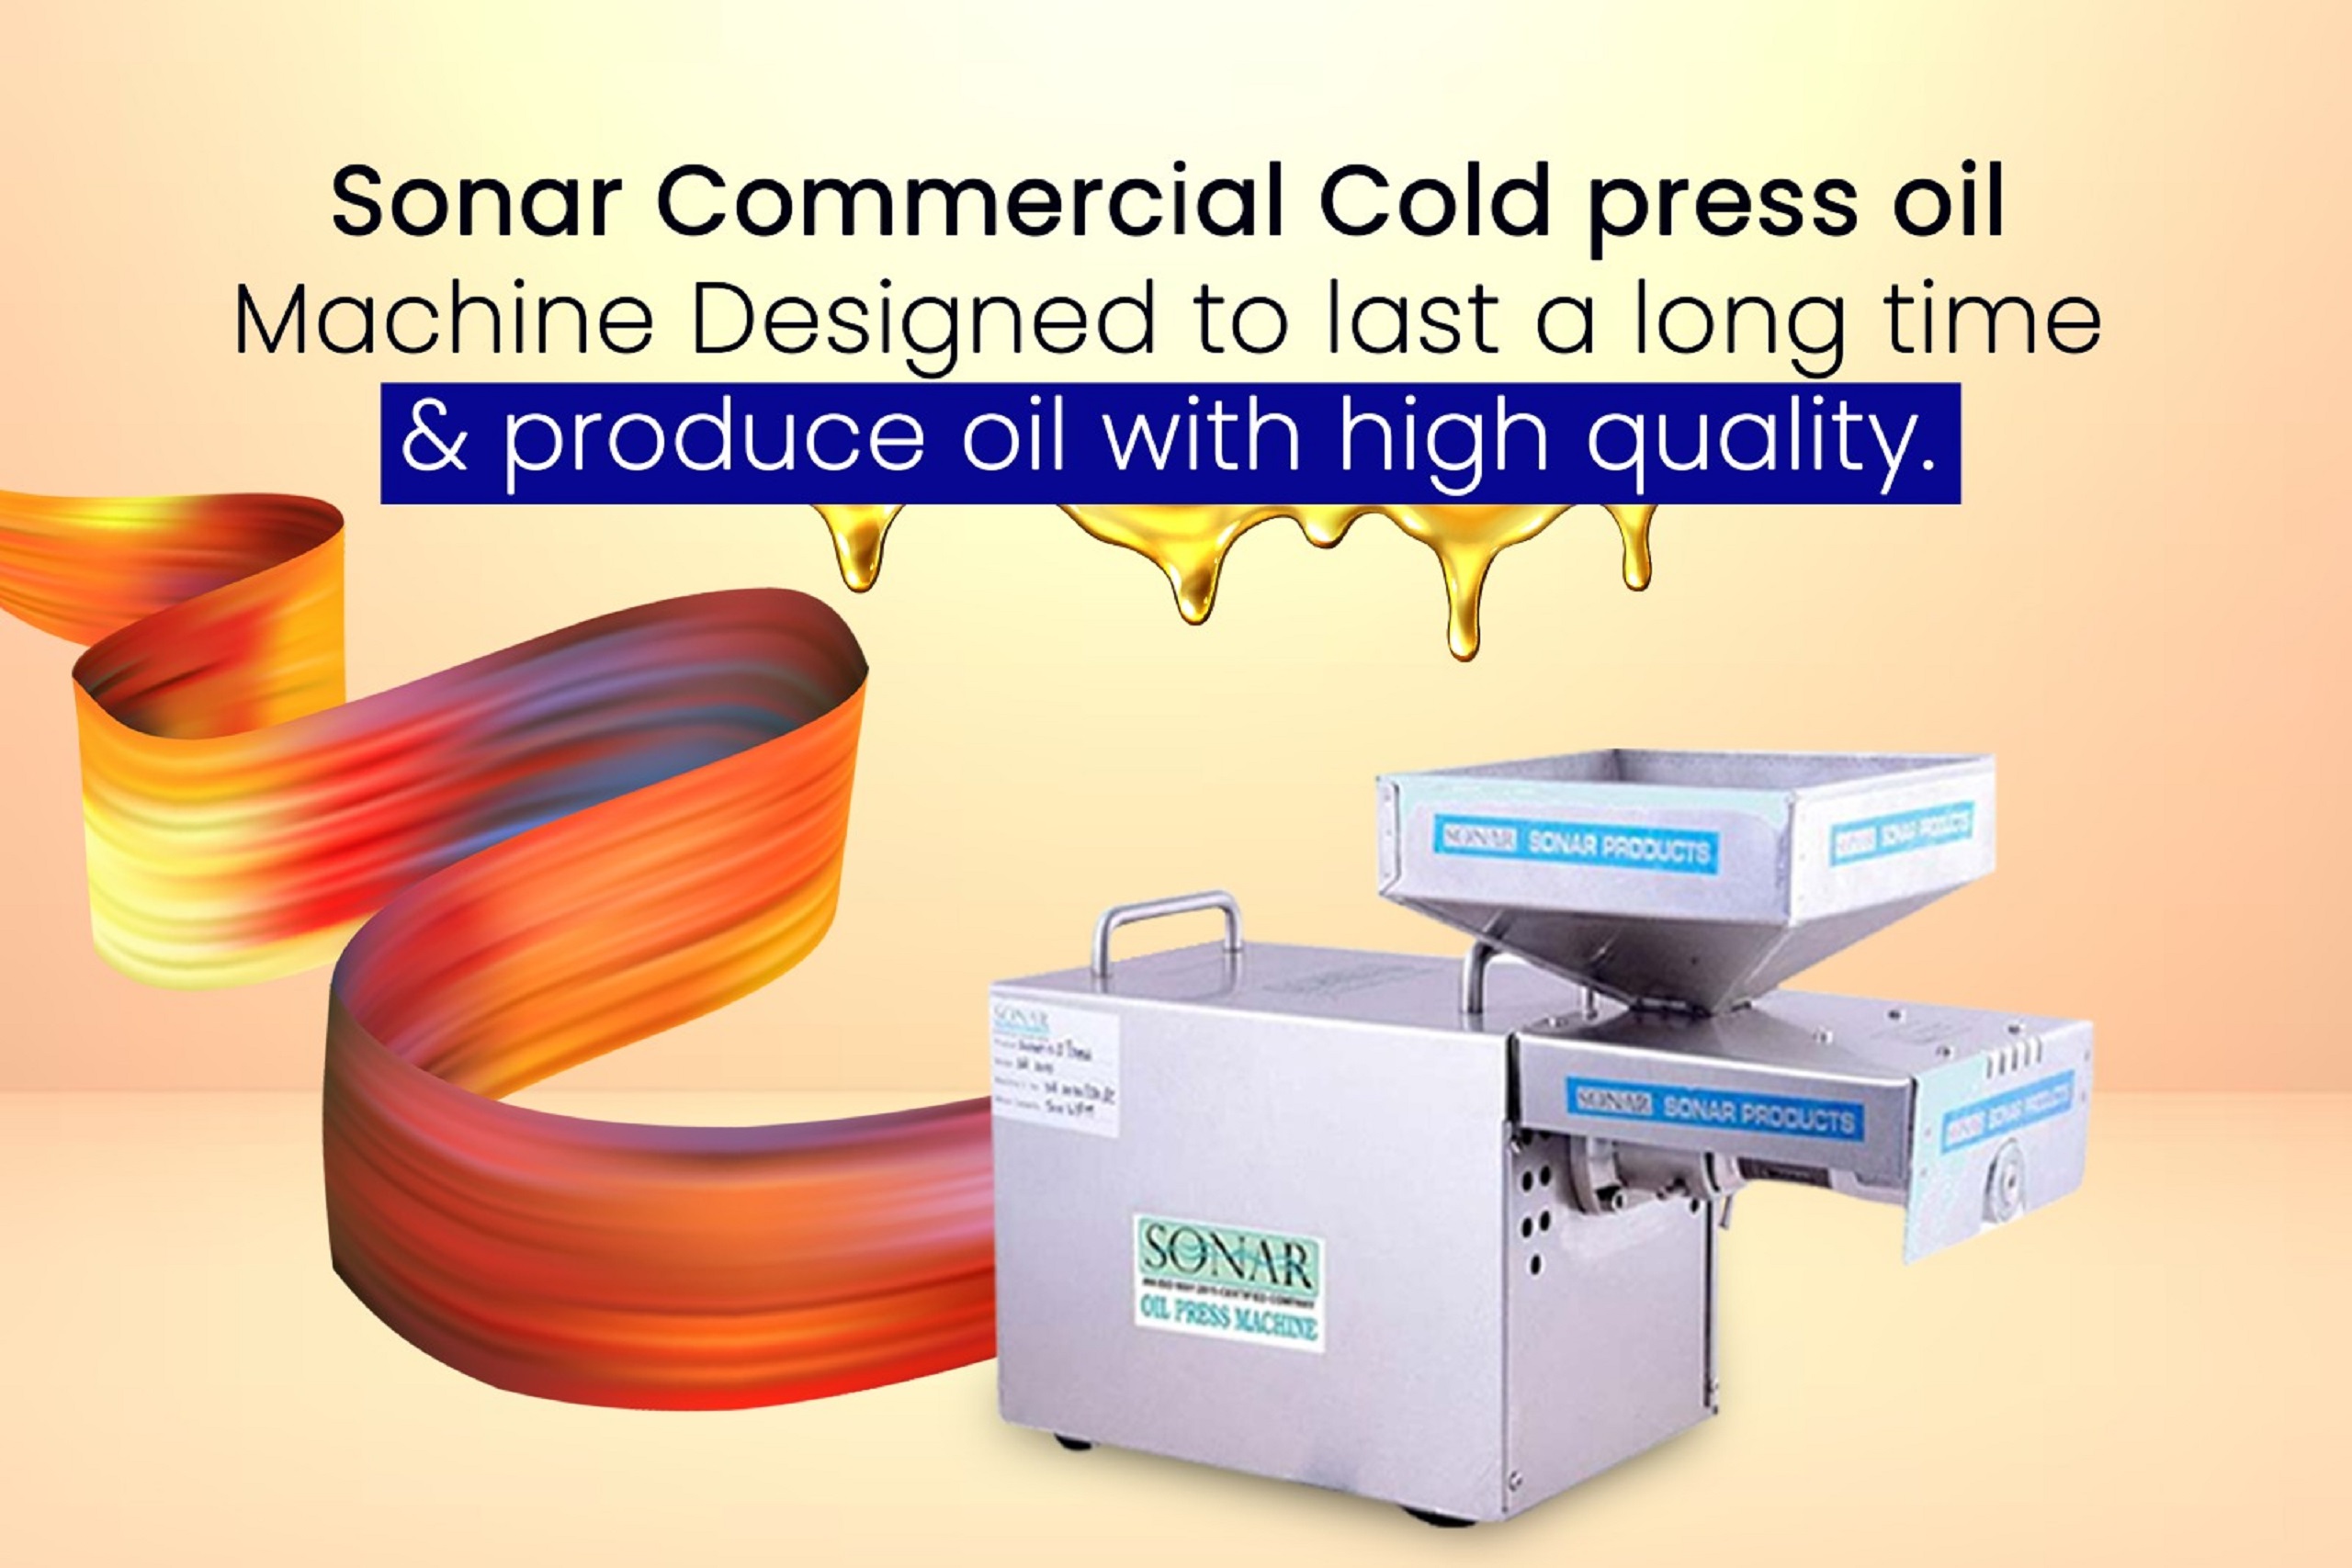 Sonar Commercial Cold press oil Machine Designed to last a long time & produce oil with high quality.